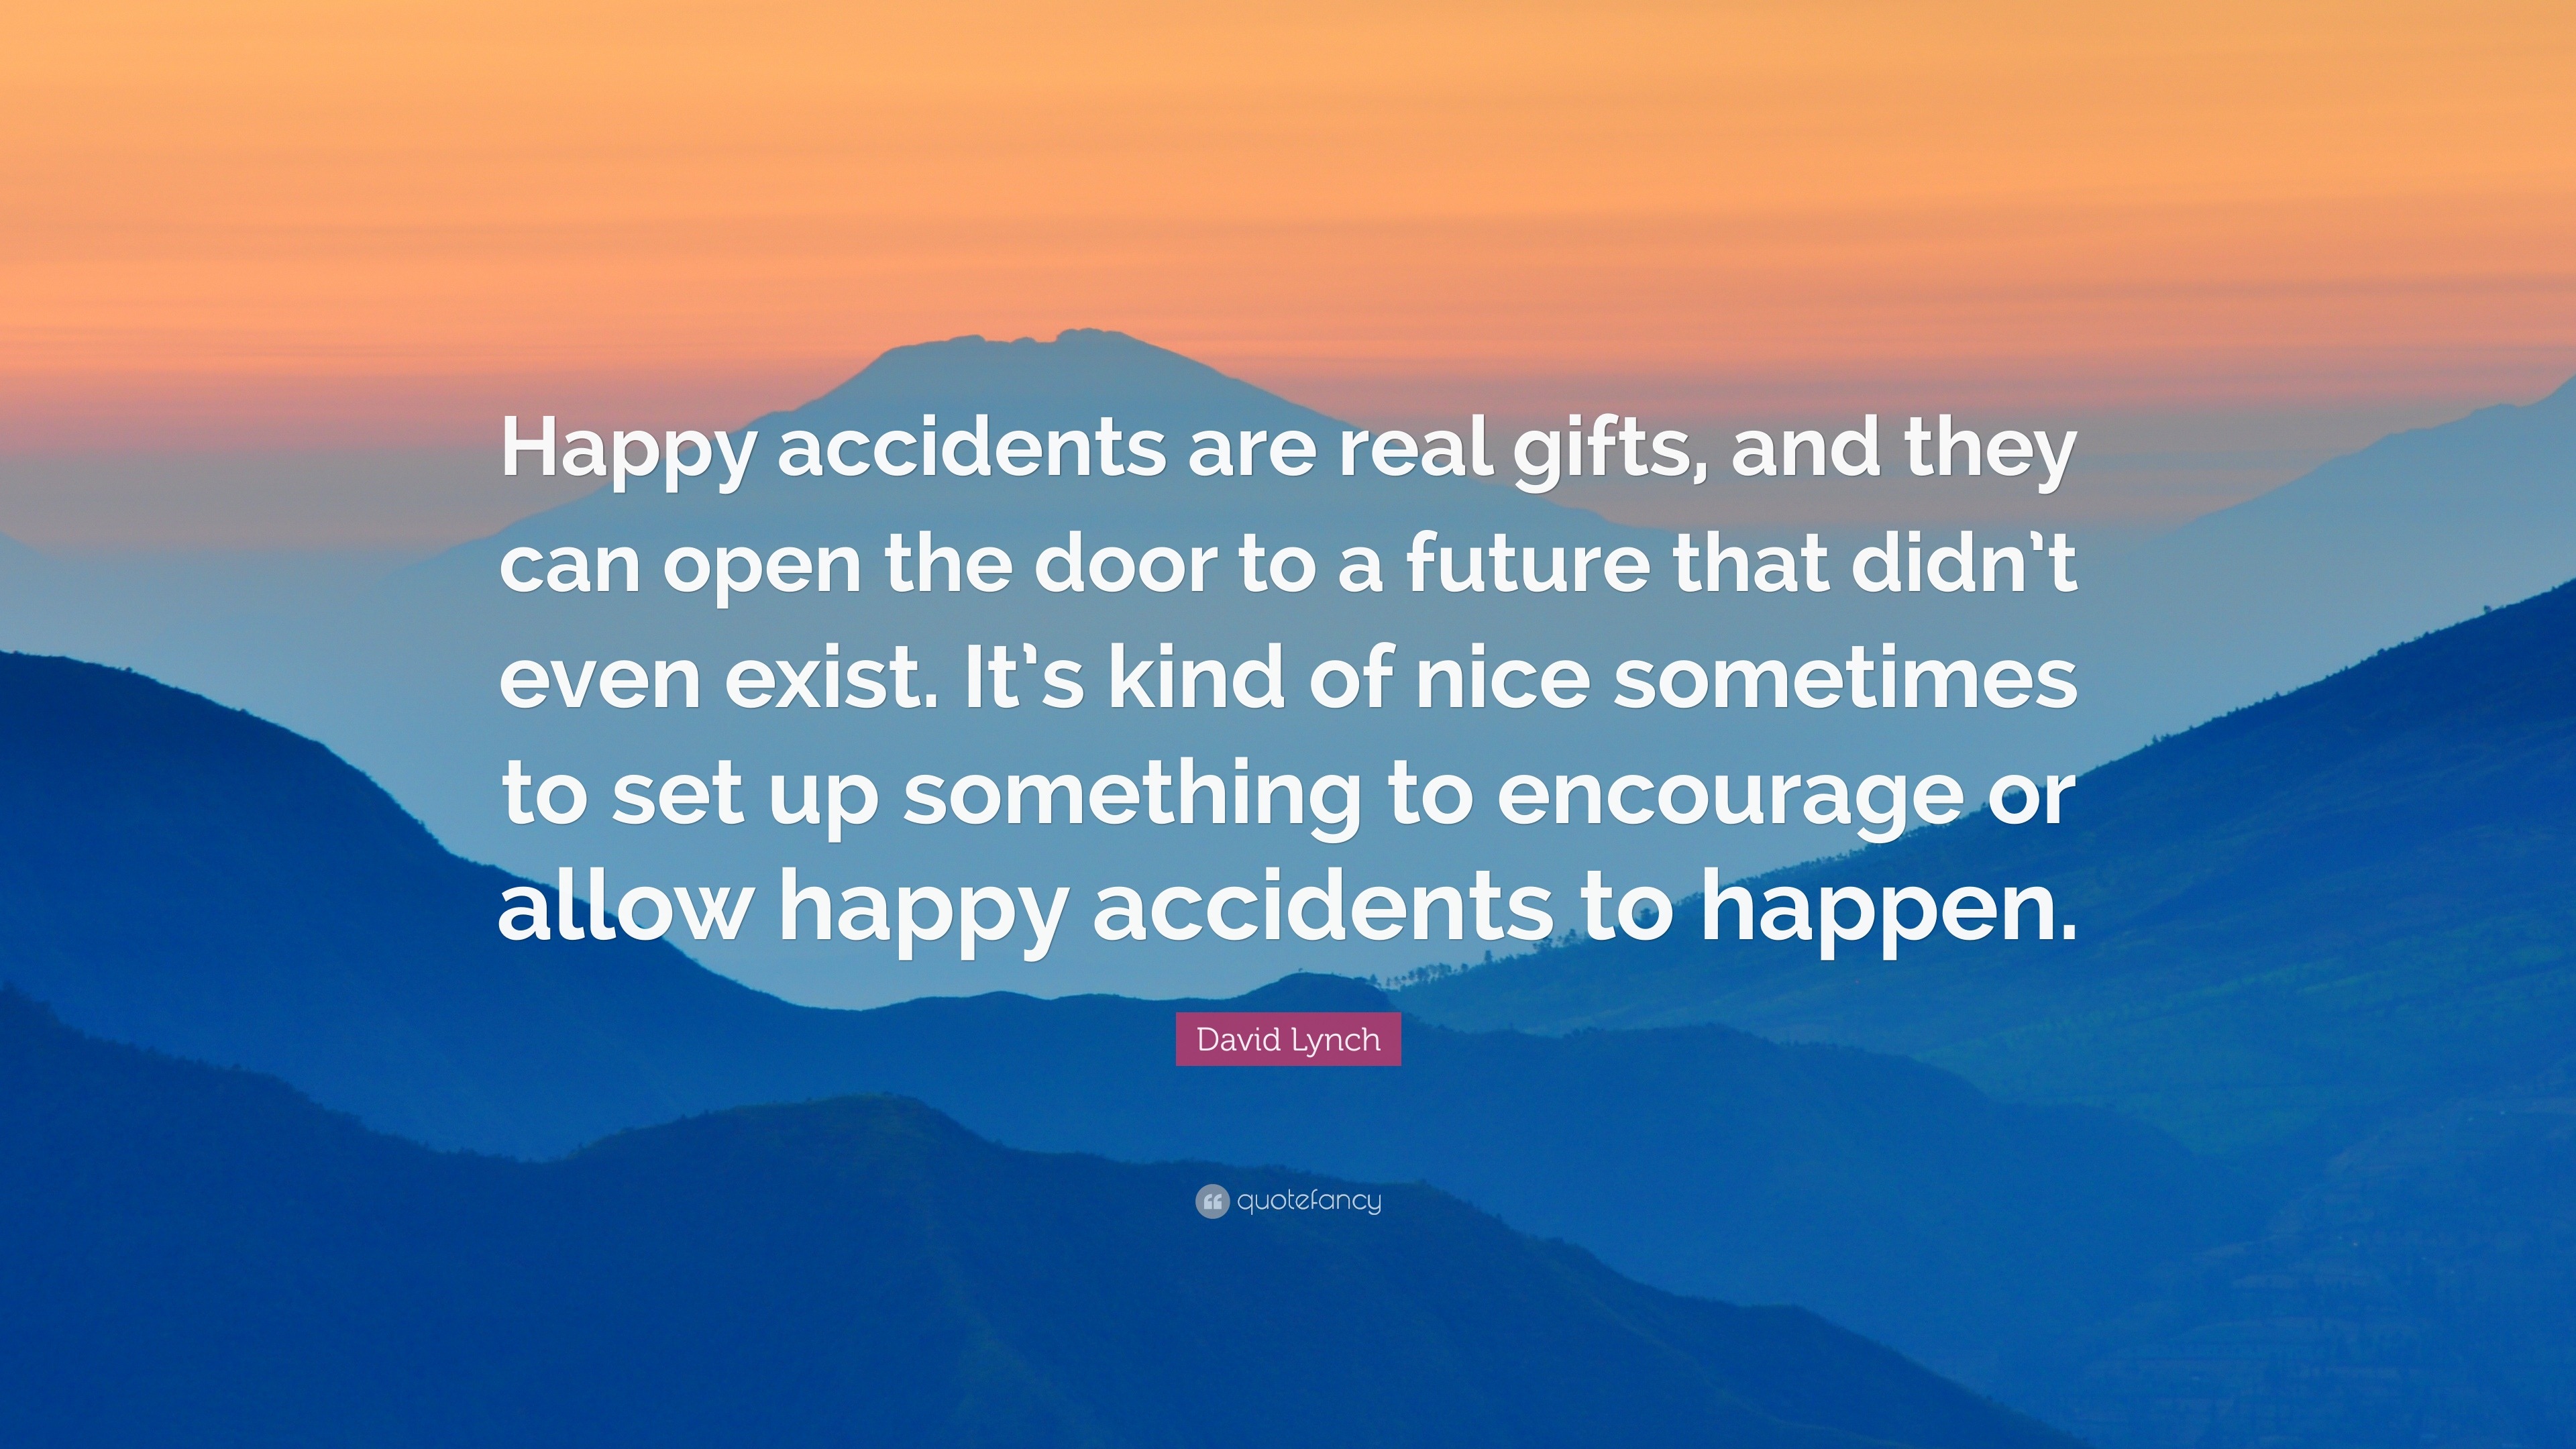 https://quotefancy.com/media/wallpaper/3840x2160/687043-David-Lynch-Quote-Happy-accidents-are-real-gifts-and-they-can-open.jpg